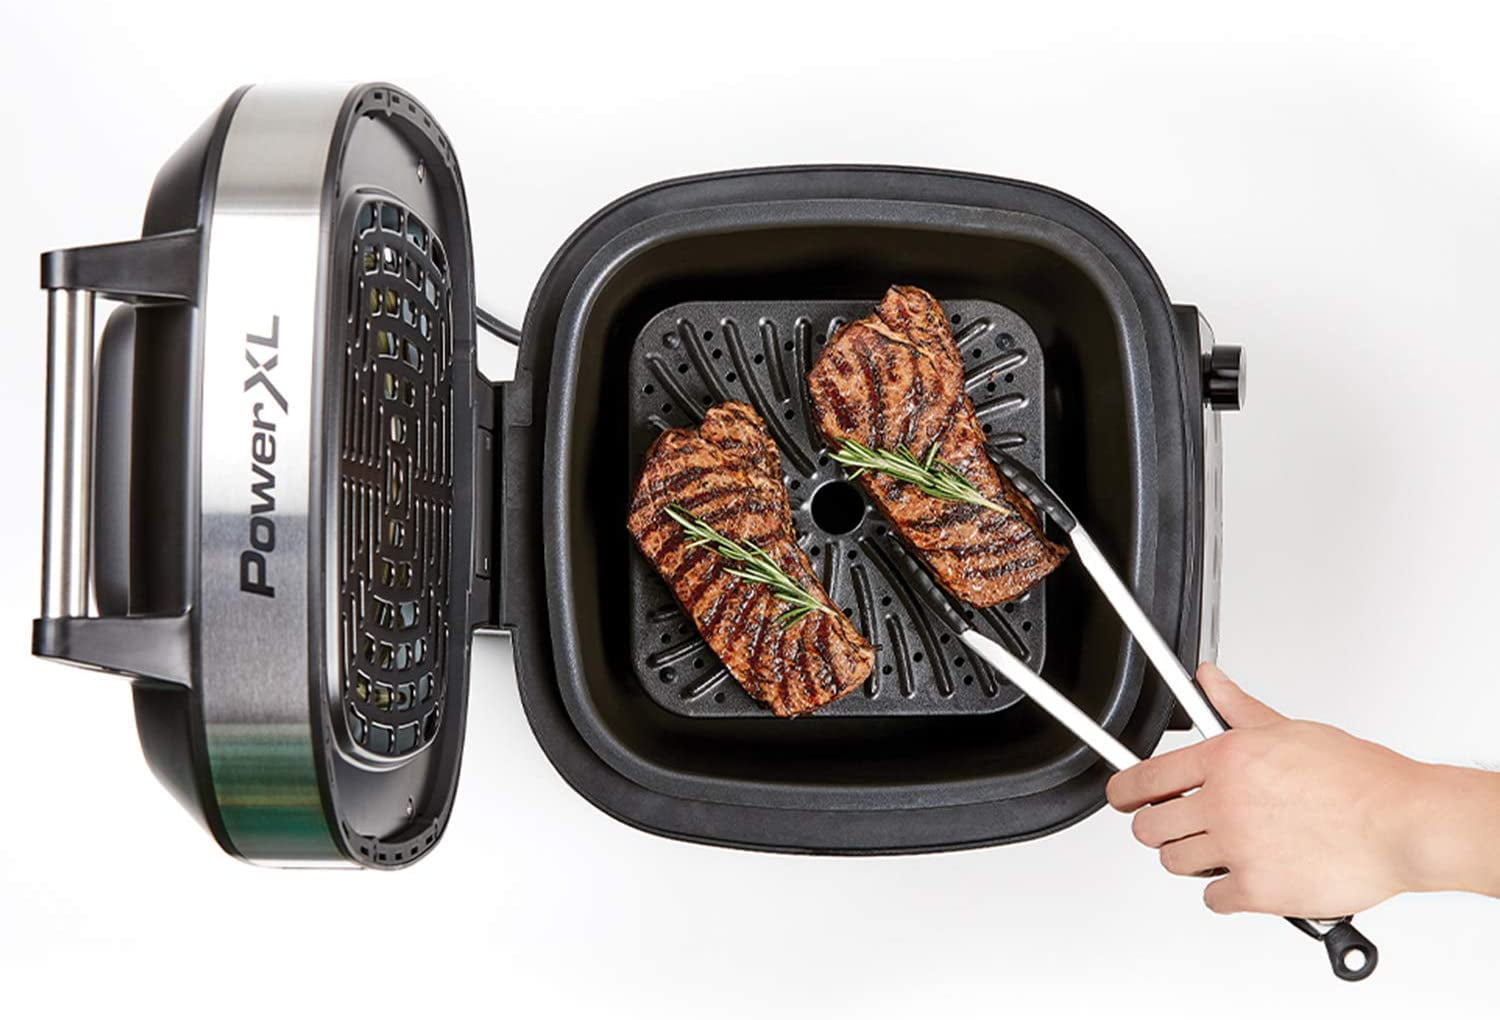 Zstar GZ01 - Indoor Grill Air Fryer Combo with See-Through Window, 4QT -  Shopping.com